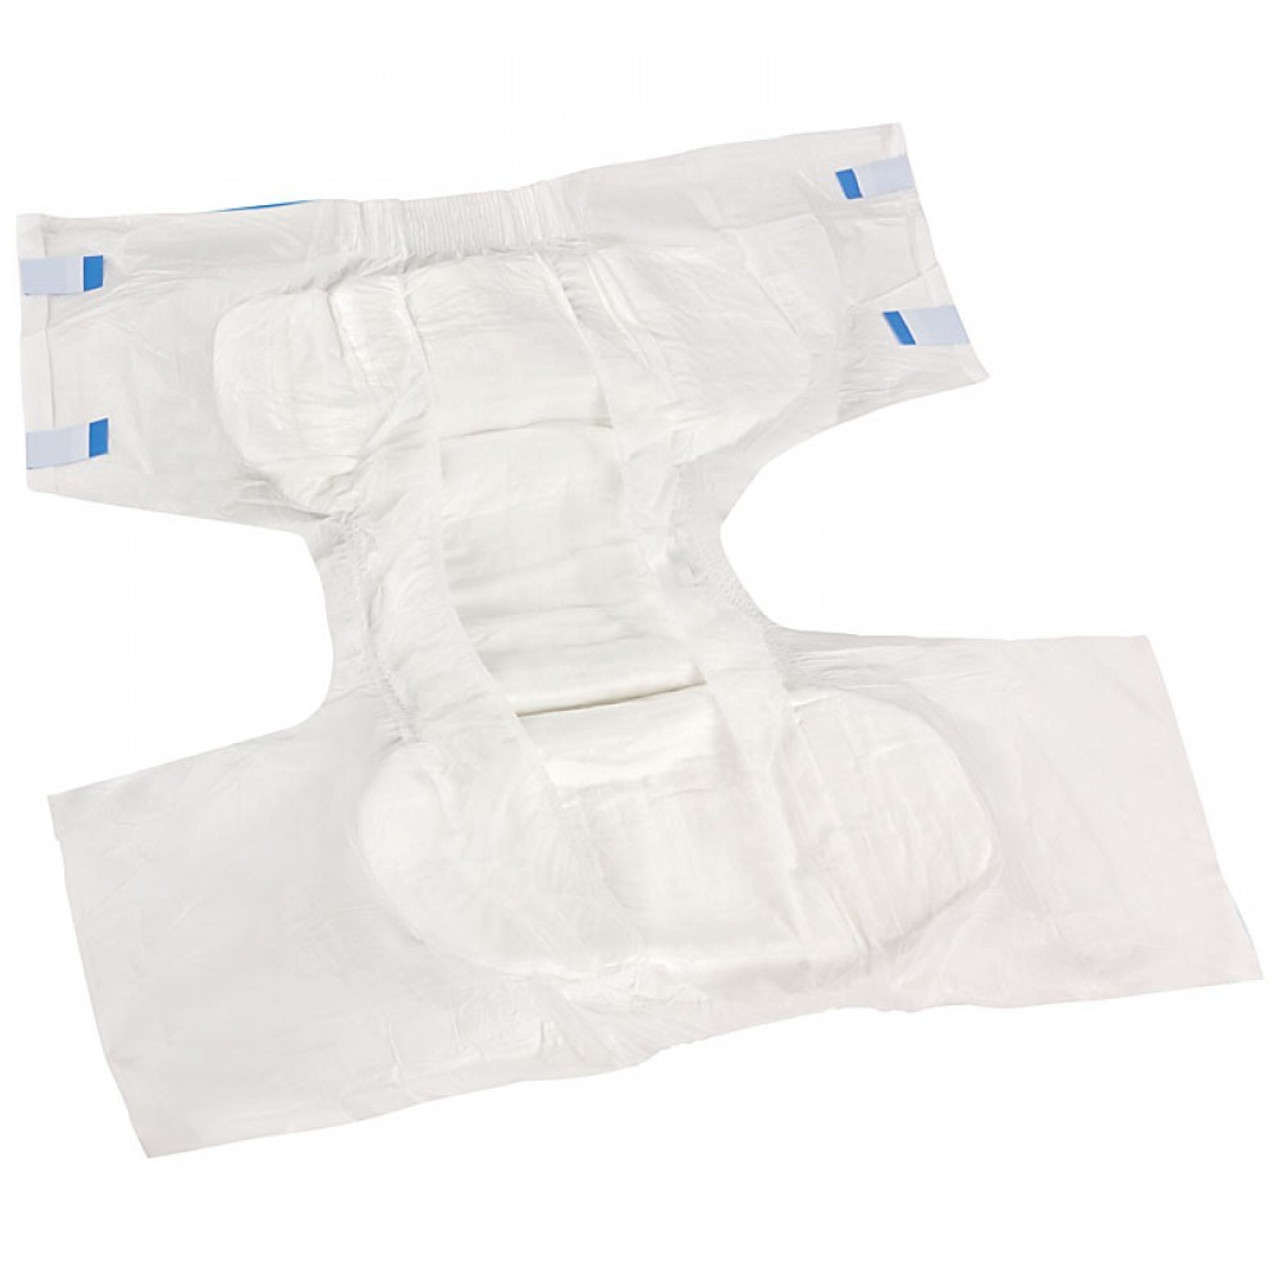 Adult Diapers Tax Deductions in Canada